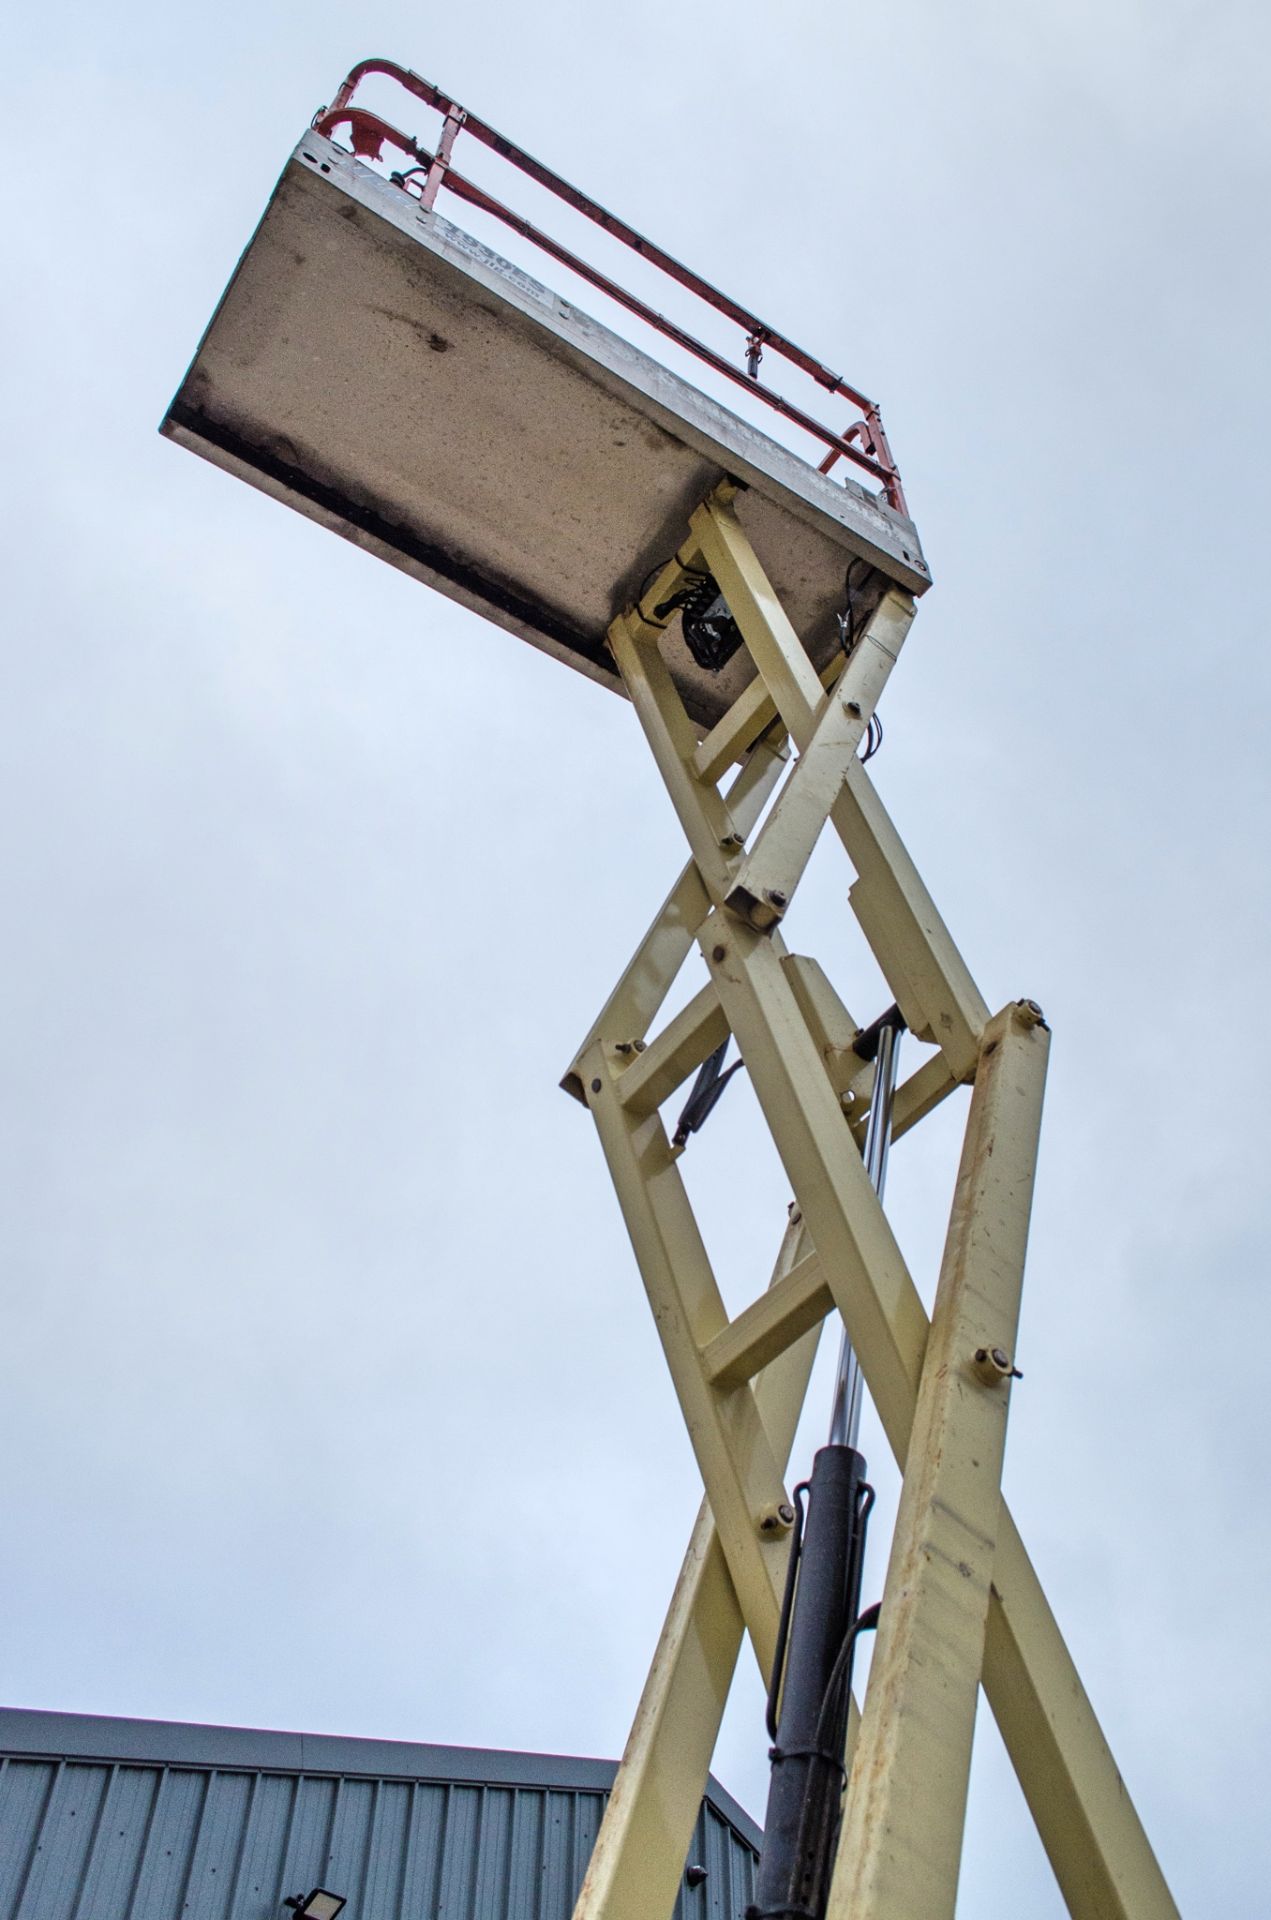 JLG 1930ES battery electric scissor lift Year: 2013 S/N: 13320 Recorded Hours: 247 A617178 - Image 6 of 8